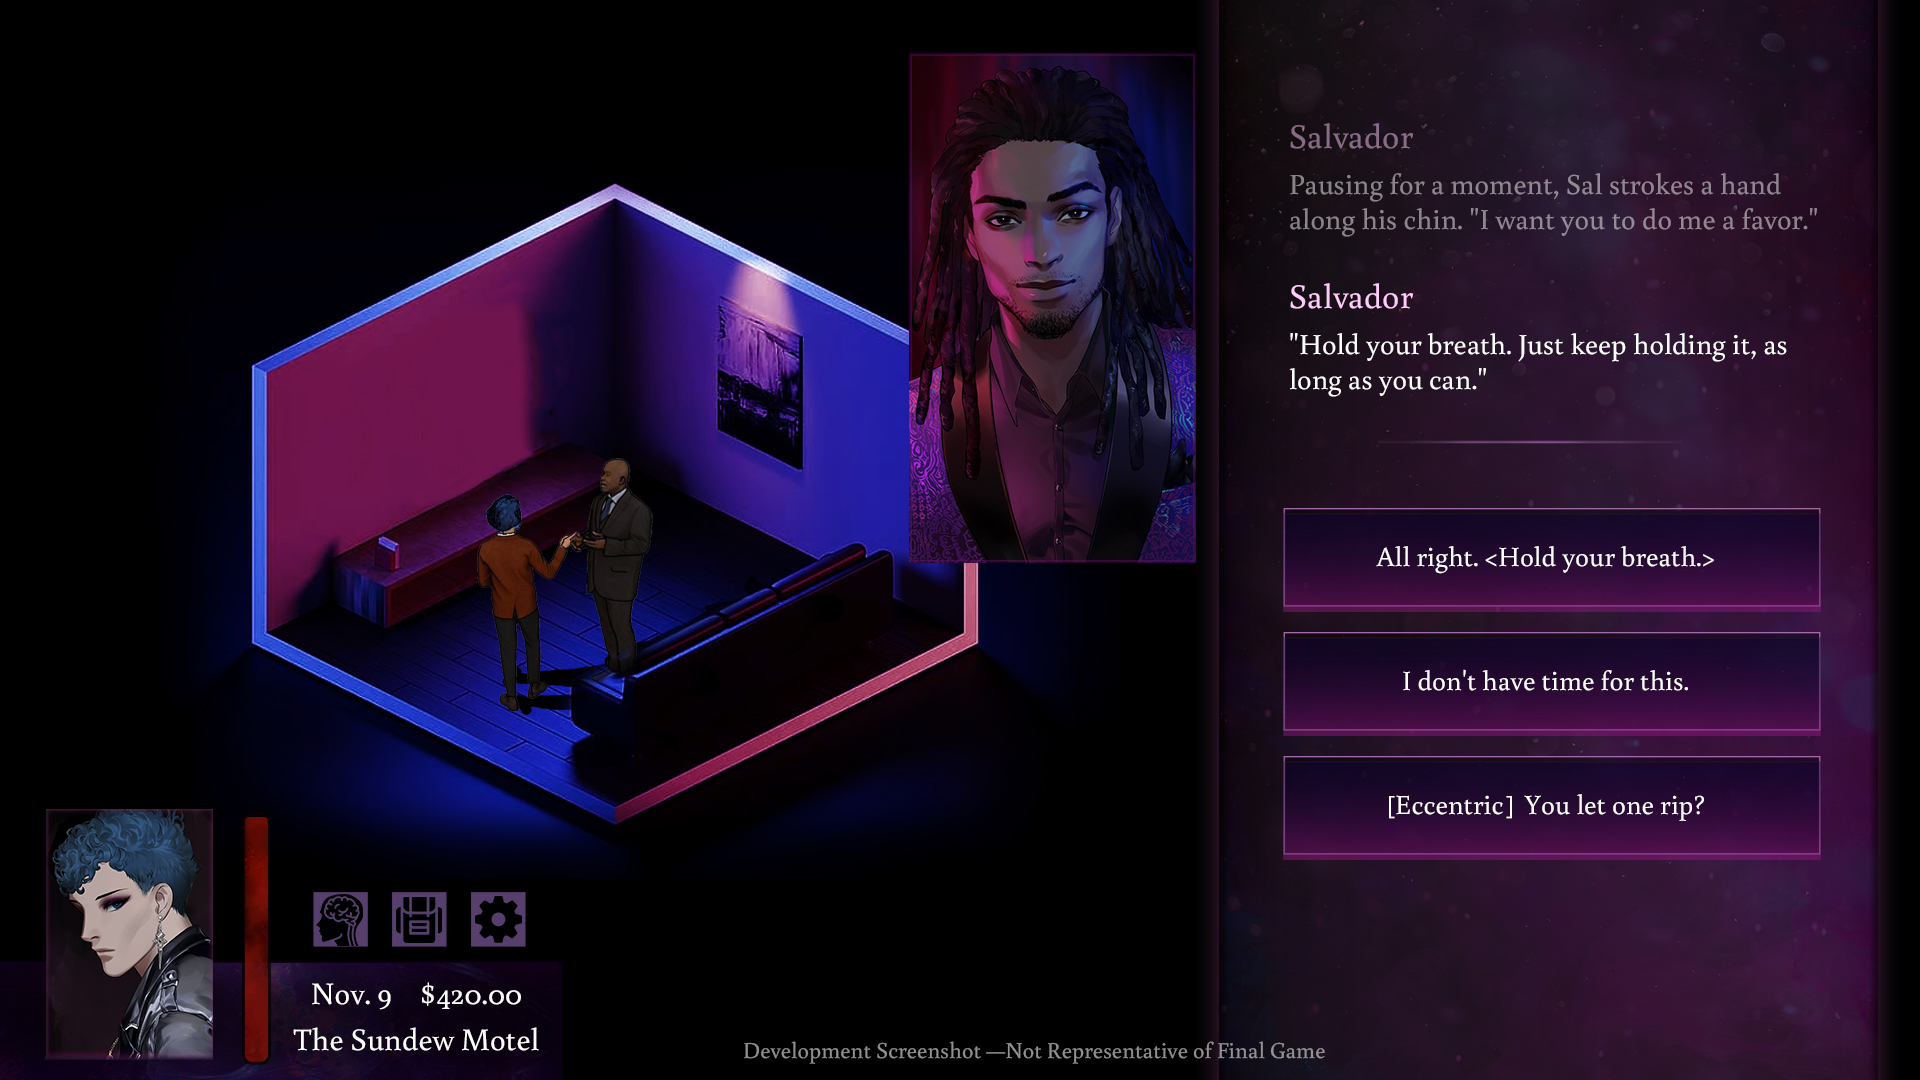 Ingame screen, you are speaking with an NPC named Salvador in a dark purple lit room and need to make a choice in your conversation.